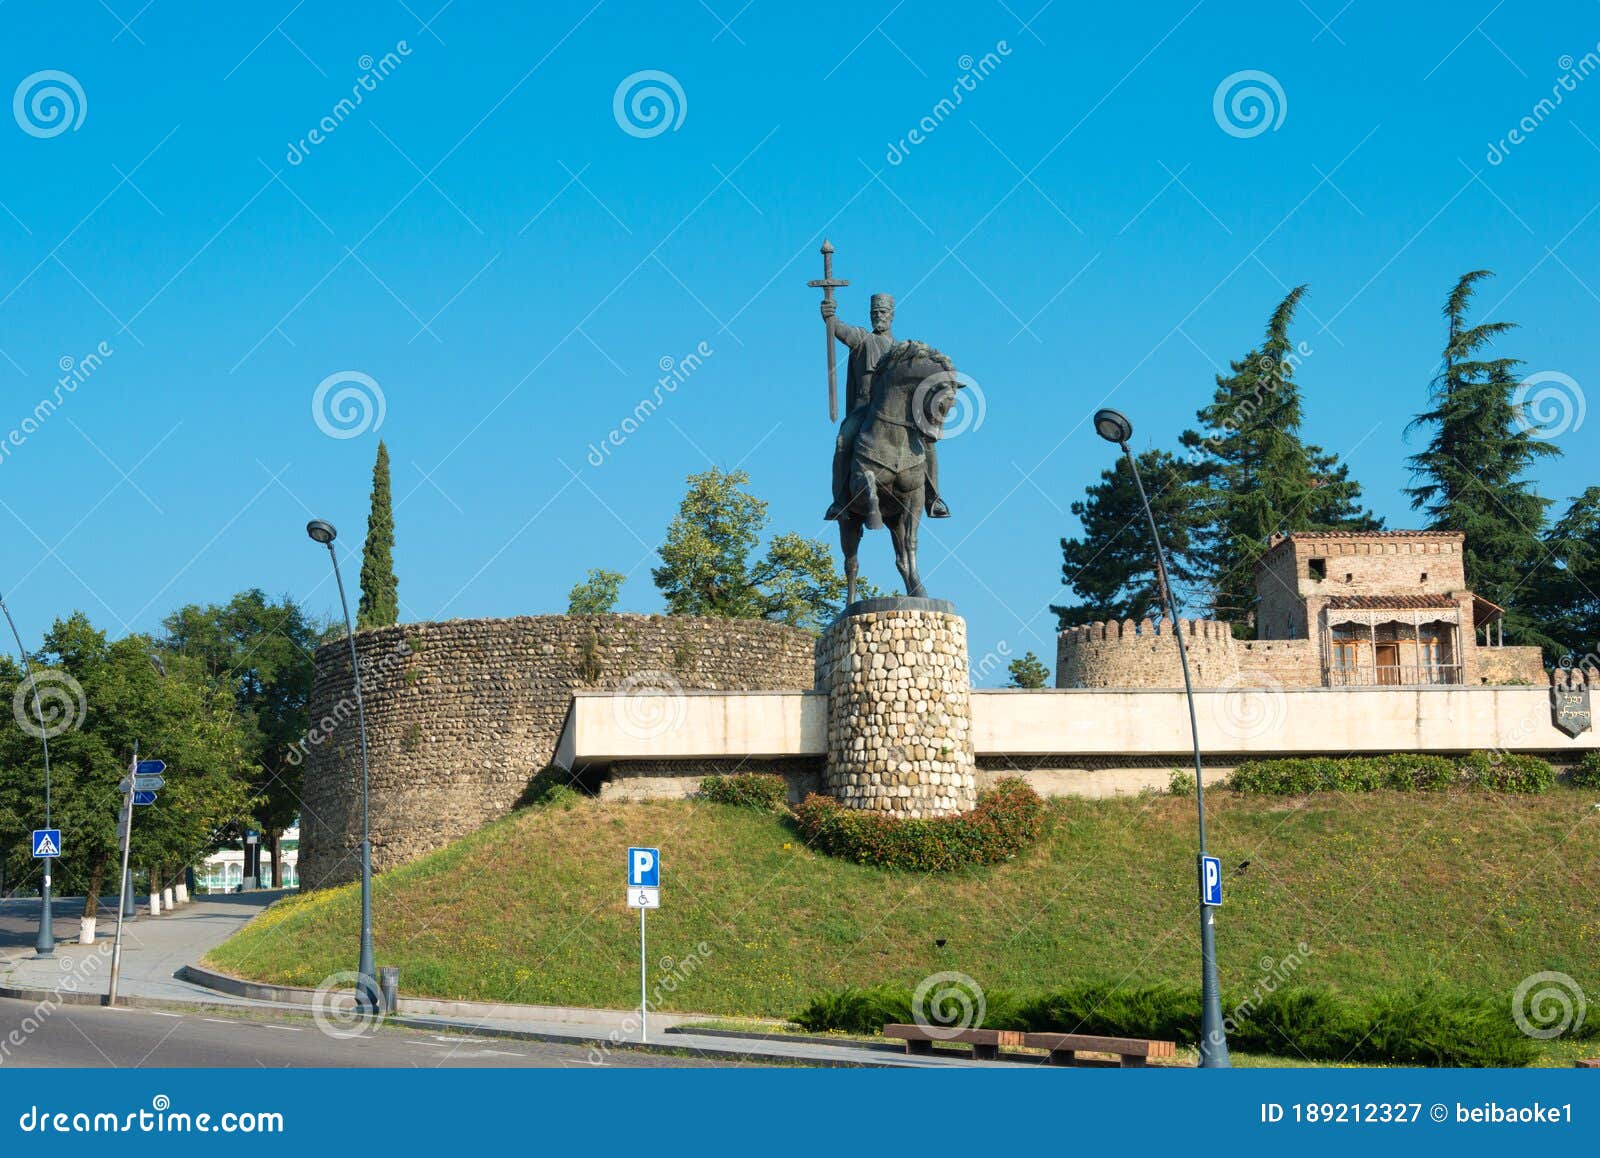 Heraclius Photos - Free & Royalty-Free Stock Photos from Dreamstime